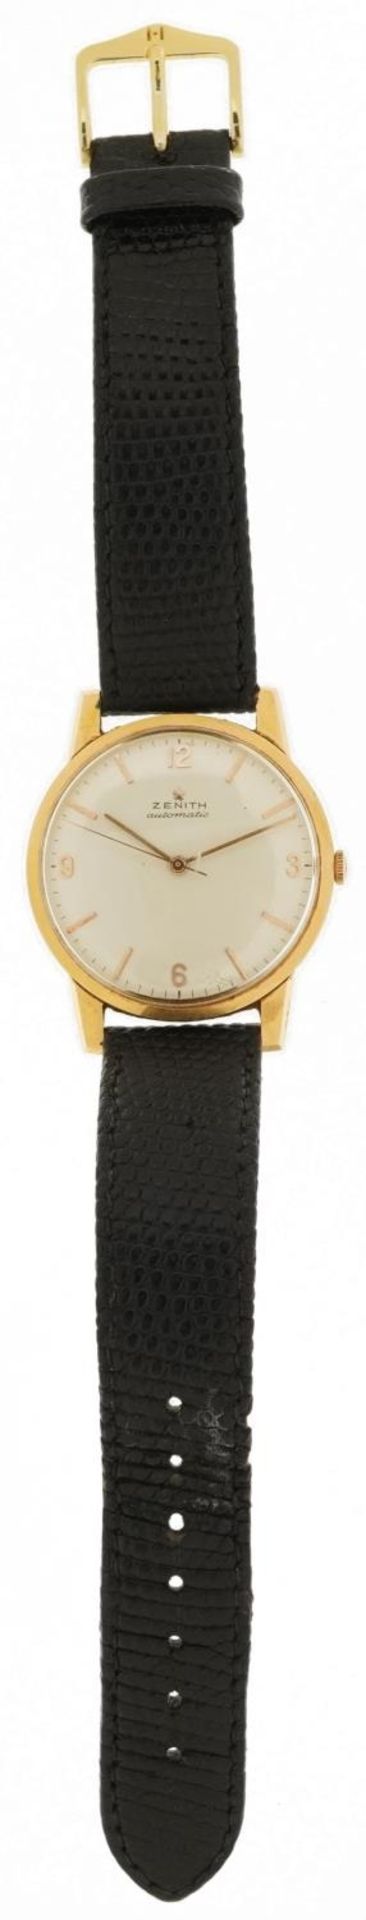 Zenith, gentlemen's 18ct gold automatic wristwatch, the case numbered 845031, 35mm in diameter, - Image 2 of 6